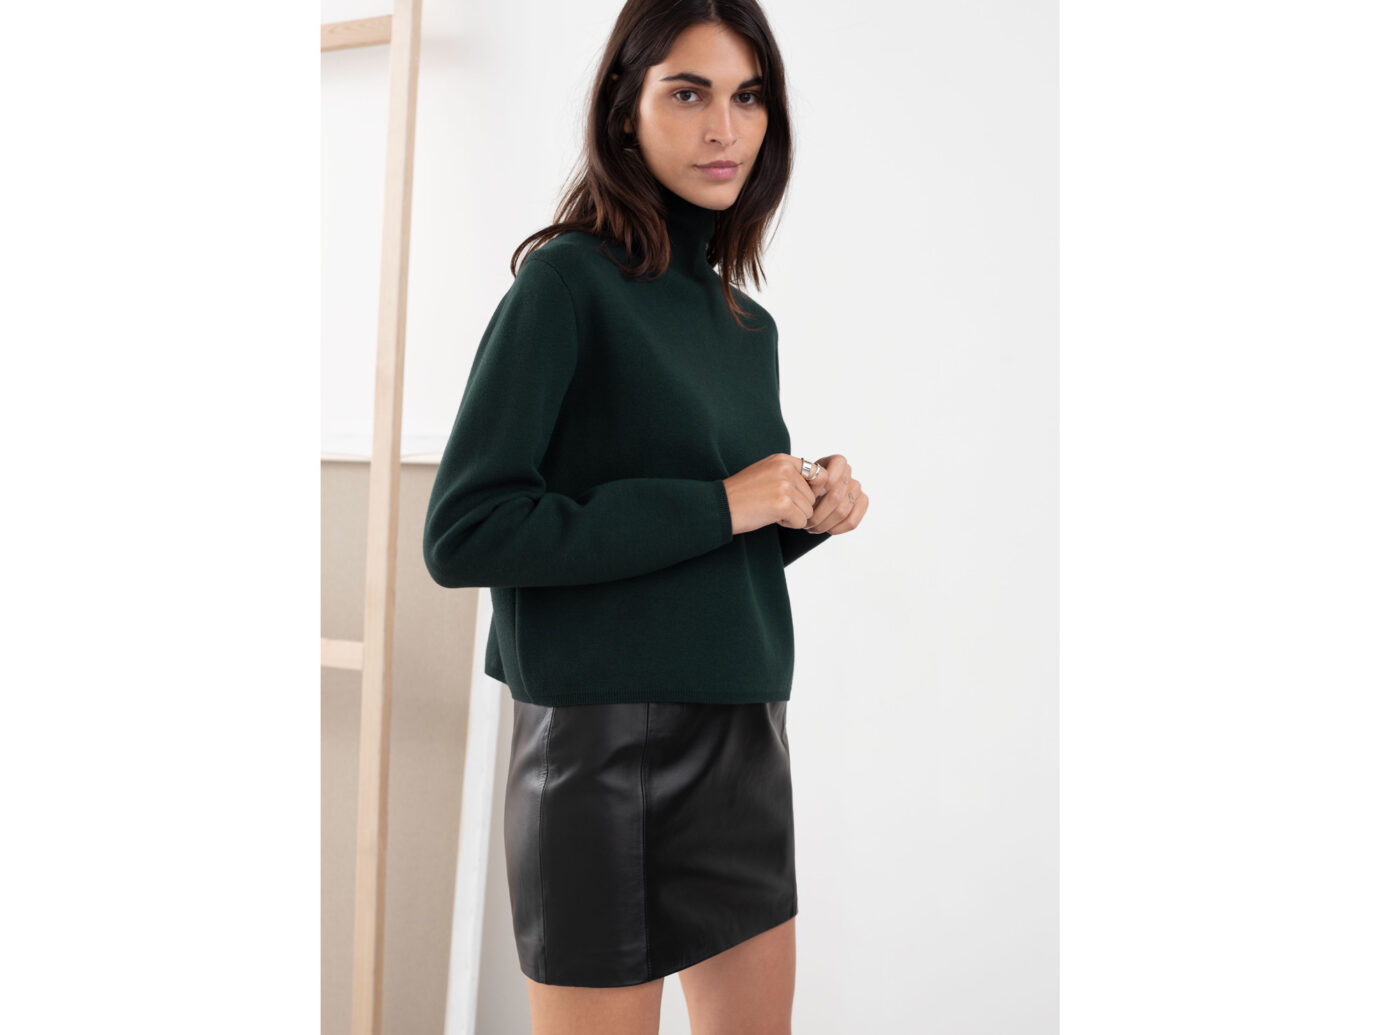 Cropped Relaxed Fit Turtleneck